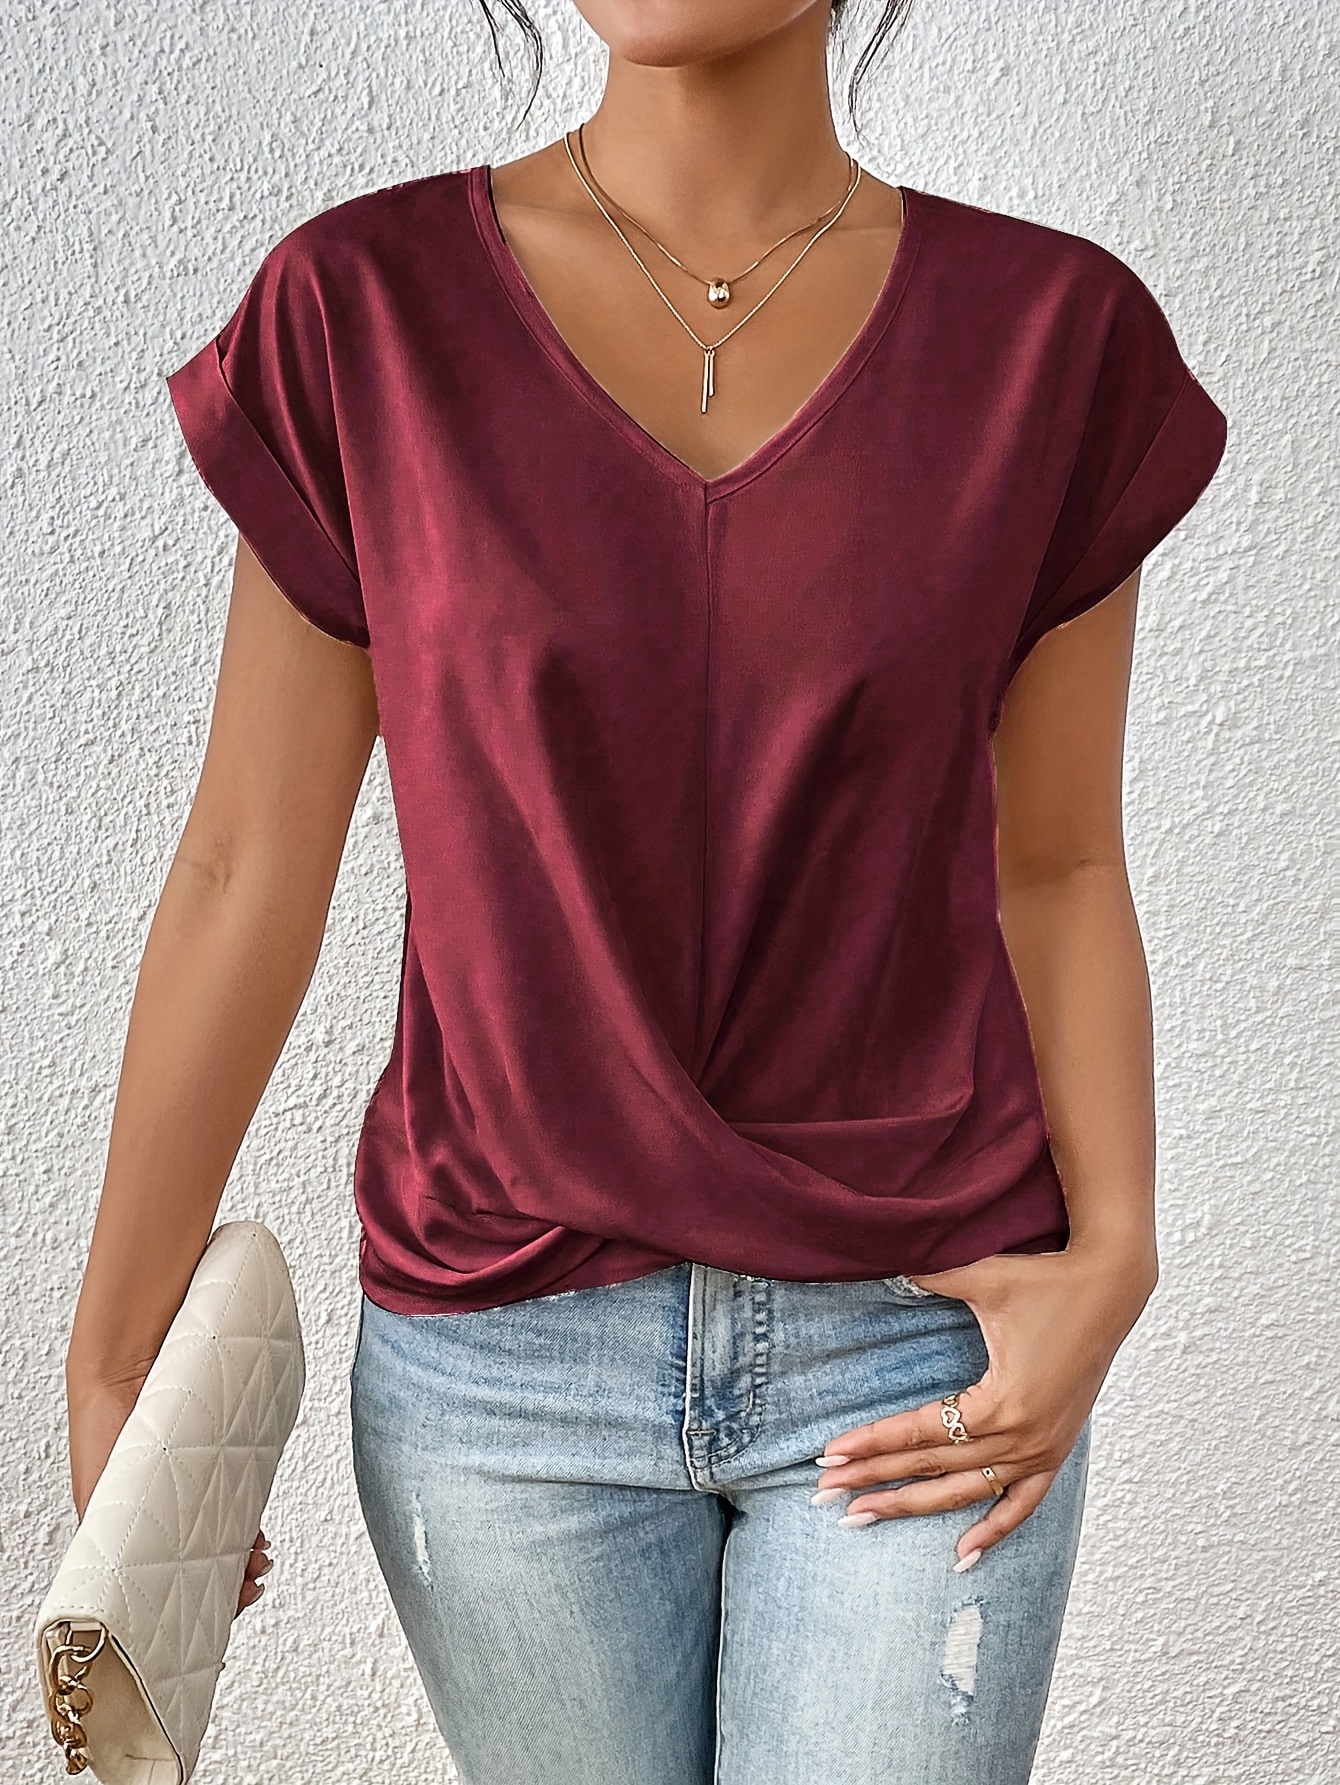 Thaisu Women's Summer Short Sleeved Minimalist Style T-Shirt, Backless  Solid Color Slim Fitting Short Top, Suitable for Daily Wear 